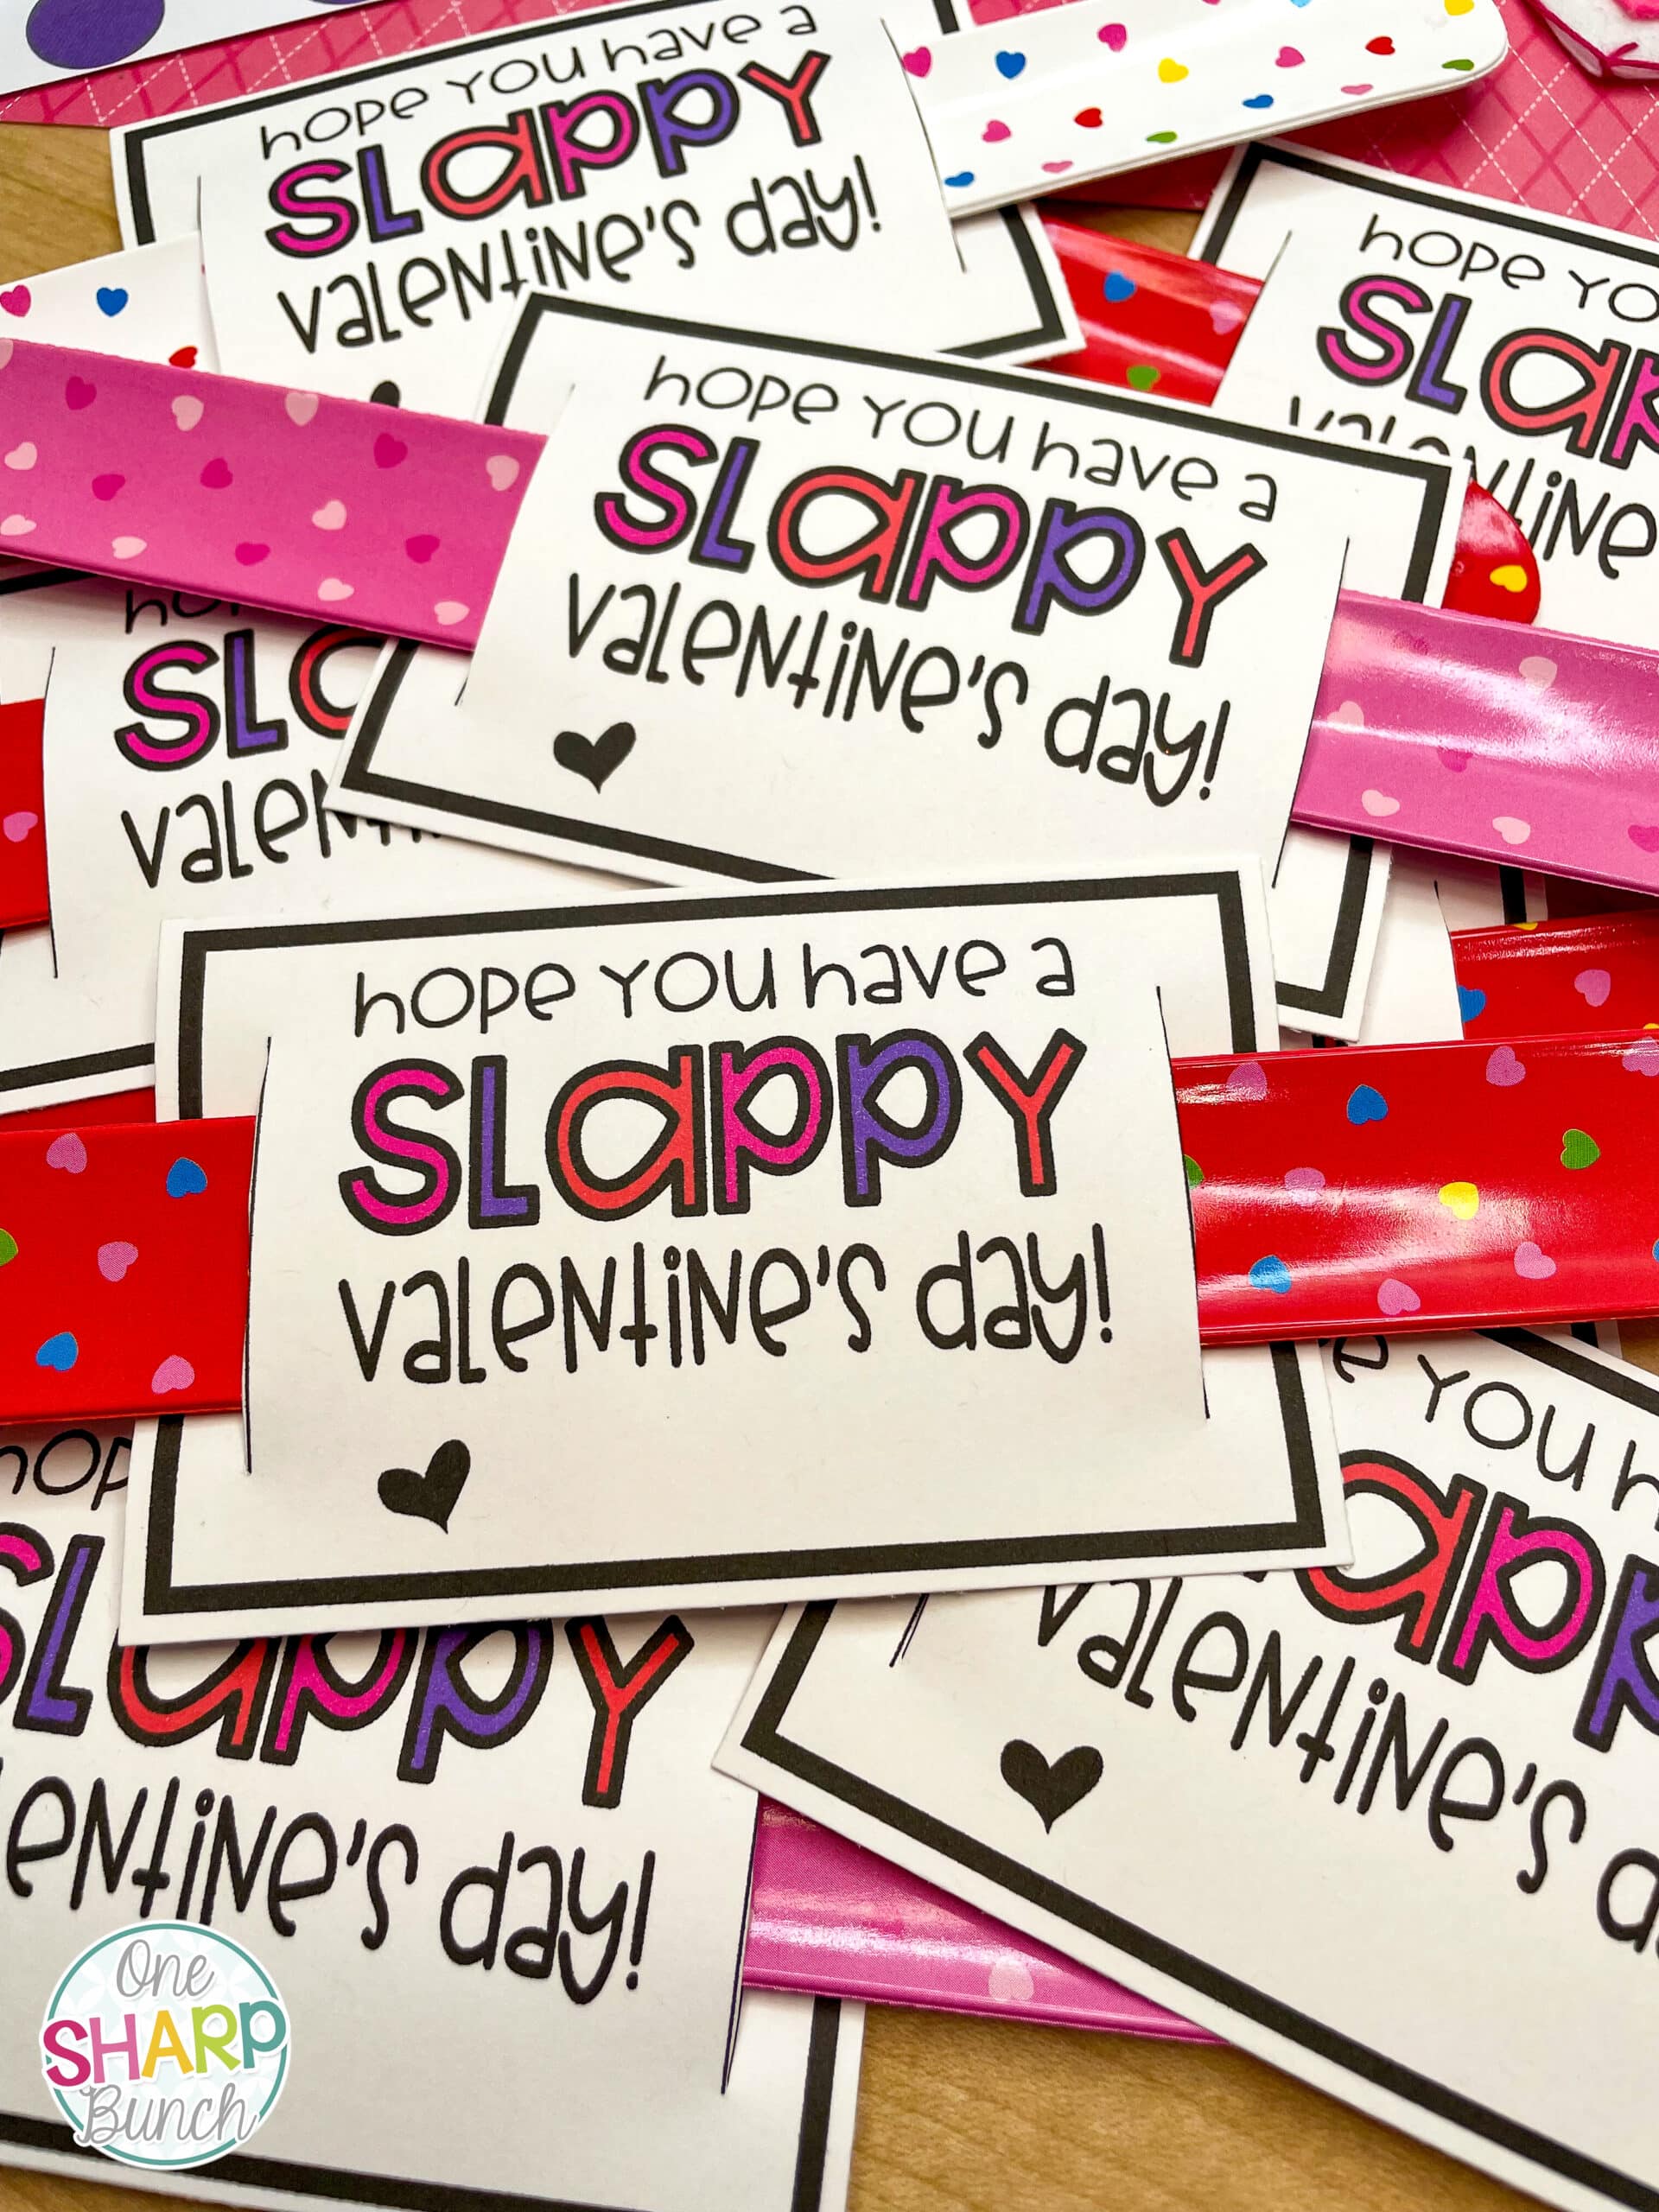 Have fun celebrating Valentine’s Day at your classroom Valentine’s party with these affordable DIY Valentine gifts for students! Your students will love these inexpensive, yet fun, Valentine’s Day student gift ideas! Perfect Valentine’s Day party ideas for Preschool, Kindergarten and 1st Grade! #valentinesday #diyvalentines #valentinesparty #kindergarten #preschool #teachers